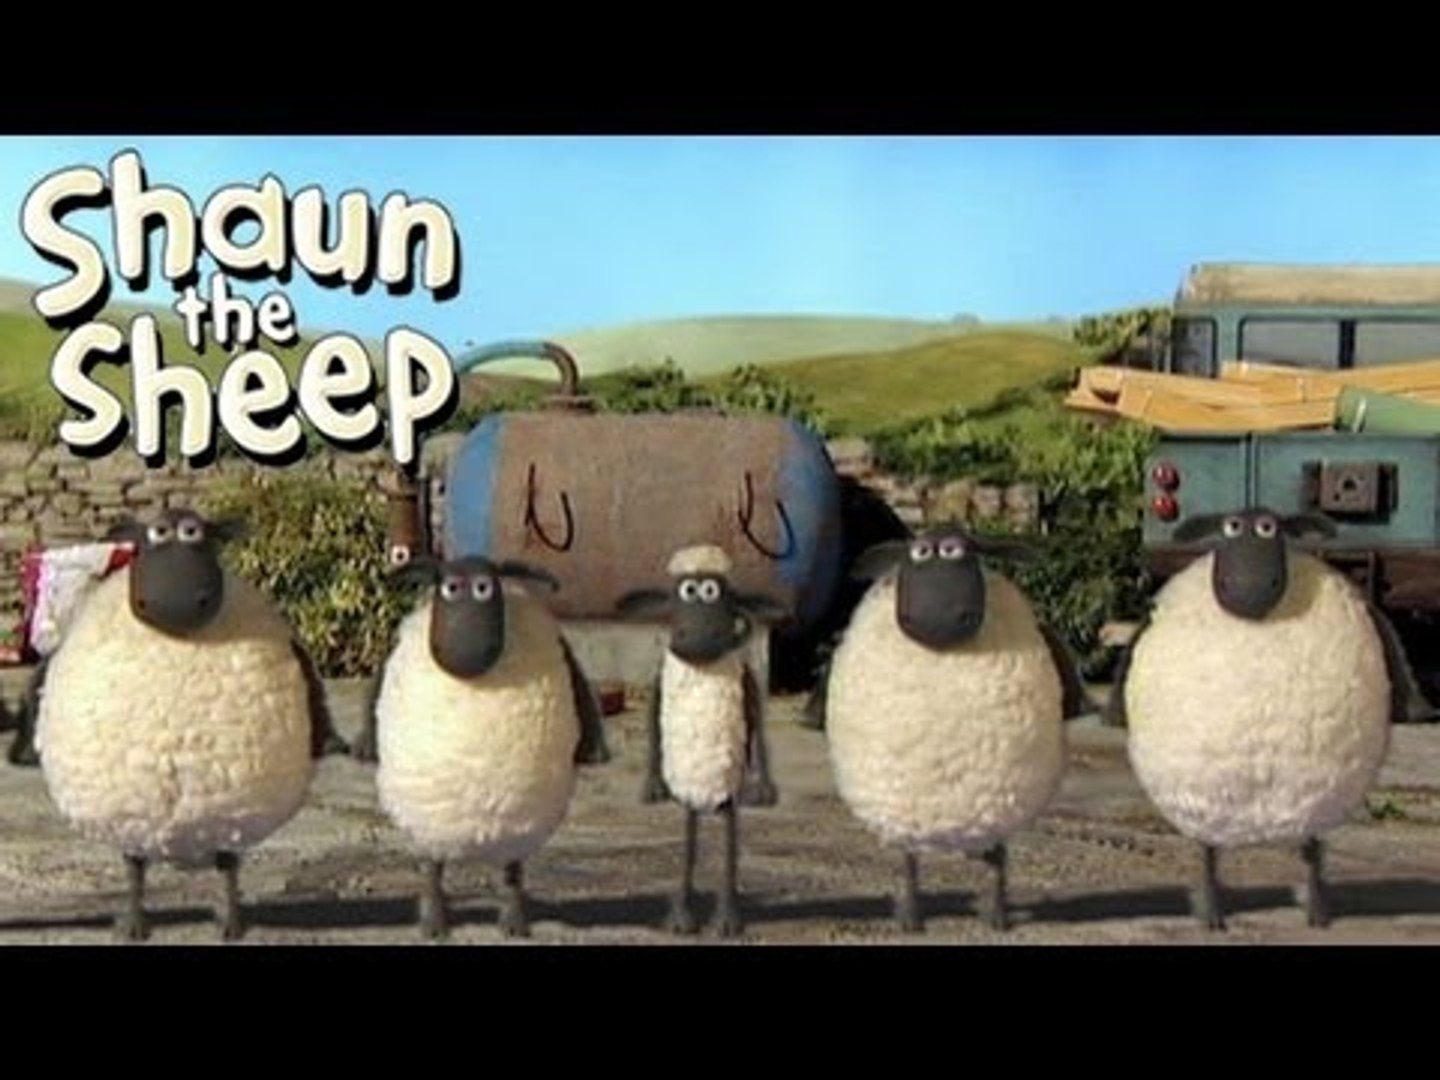 Shaun the Sheep - River Dance (OFFICIAL VIDEO) - video Dailymotion